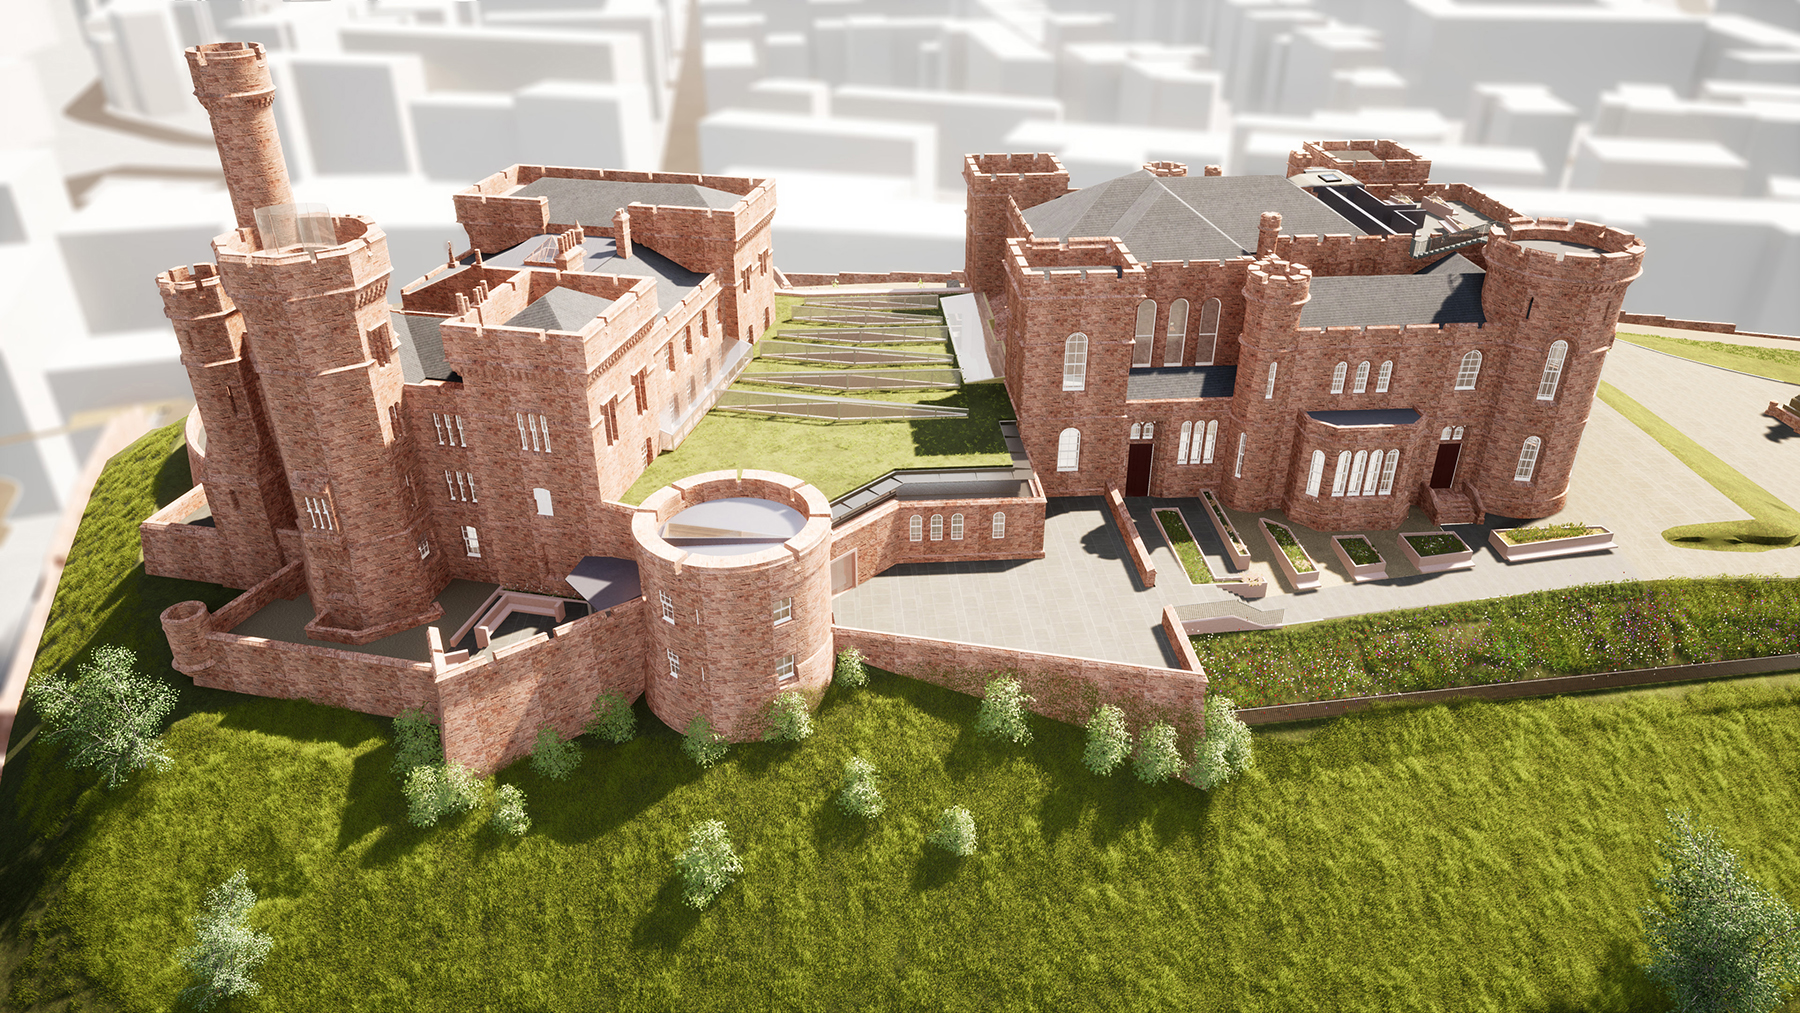 The two-building complex that constitutes Inverness Castle in the popular Highlands region of Scotland is being renovated to include a visitors center. (Rendering courtesy of LDN Architects LLP ©)